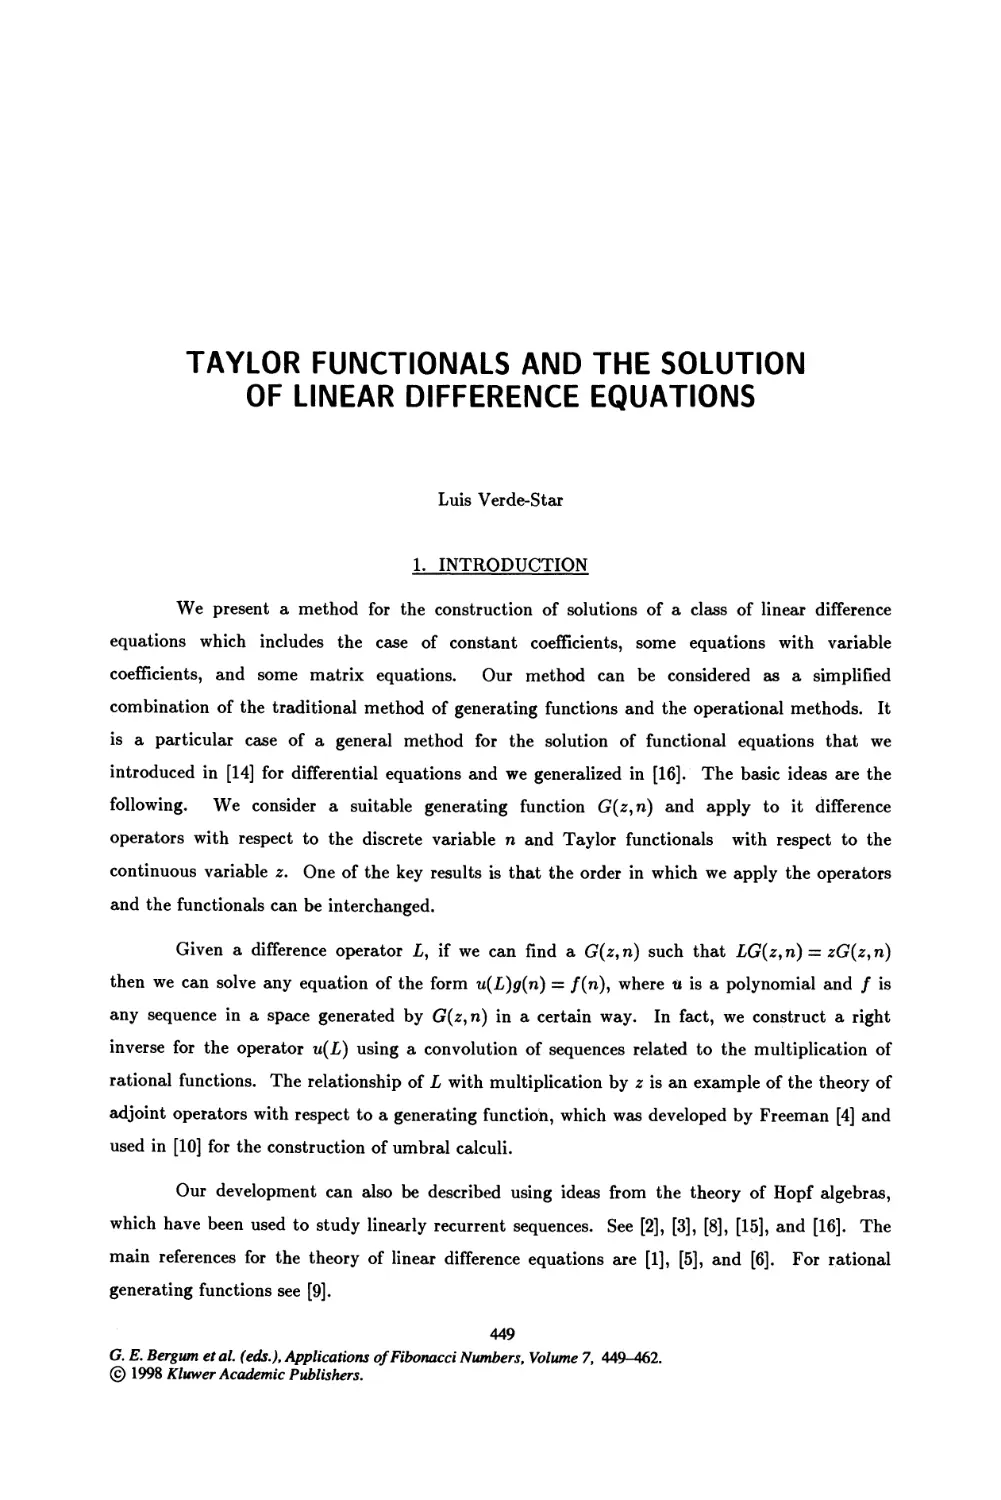 49. Taylor Functionals and the Solution of Linear Difference Equations